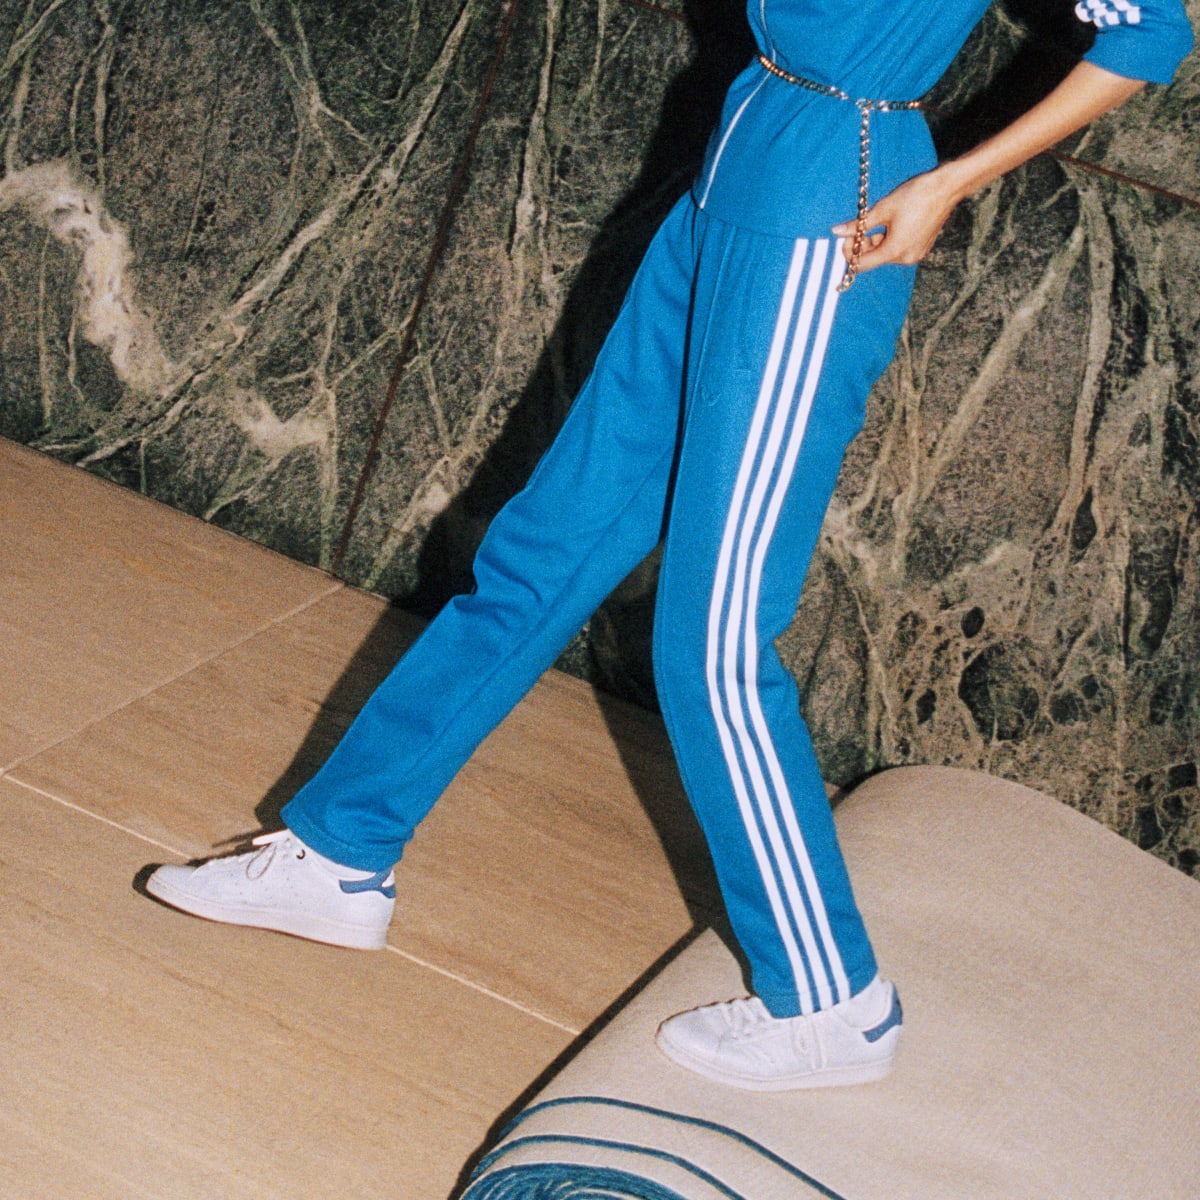 Blue Version Montreal Track Pants